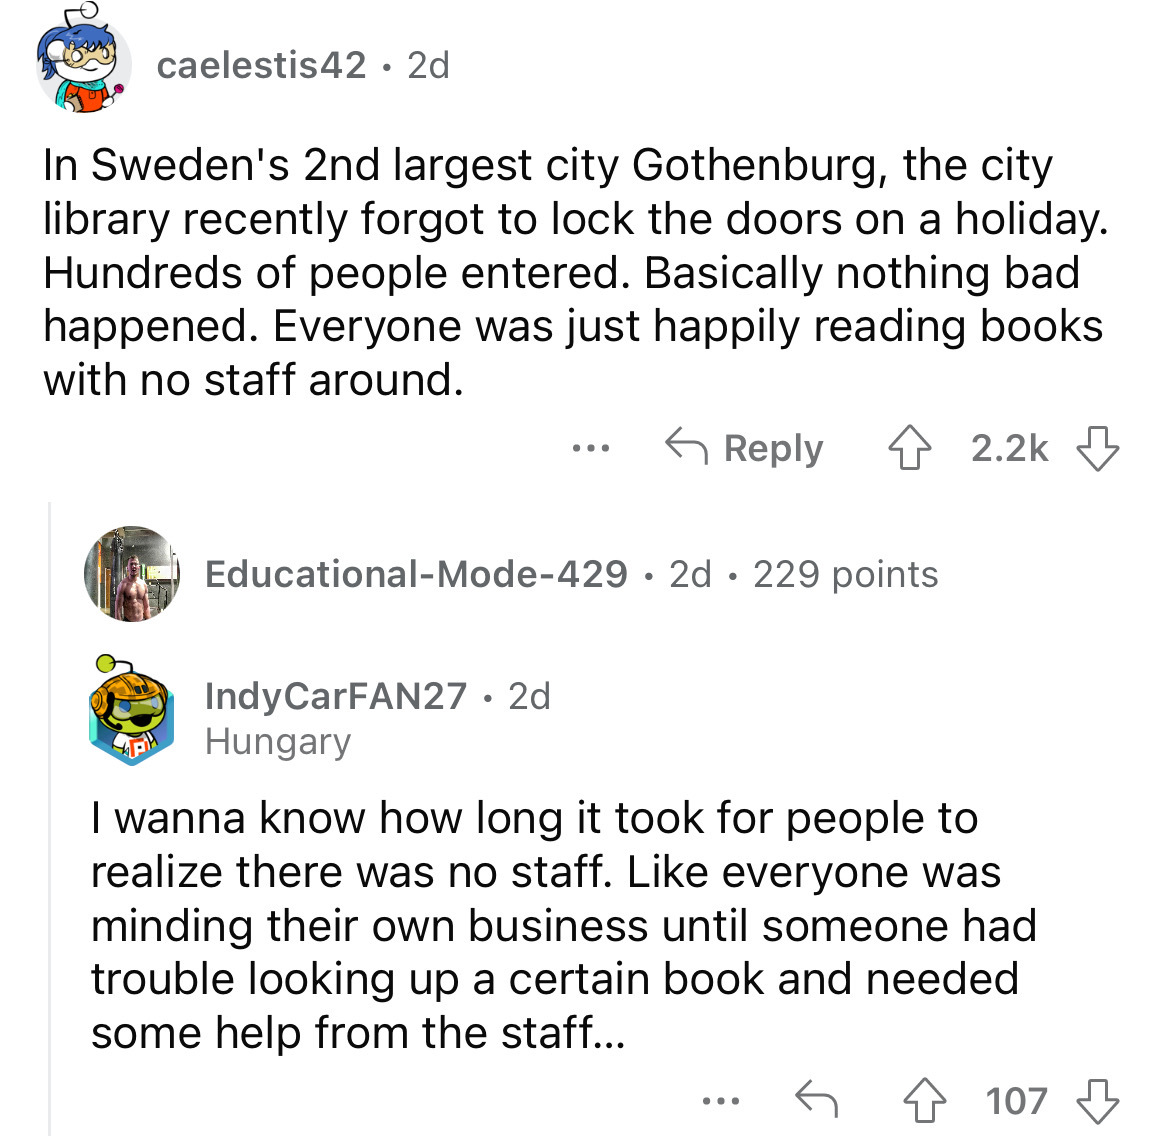 angle - caelestis42 2d In Sweden's 2nd largest city Gothenburg, the city library recently forgot to lock the doors on a holiday. Hundreds of people entered. Basically nothing bad happened. Everyone was just happily reading books with no staff around.…